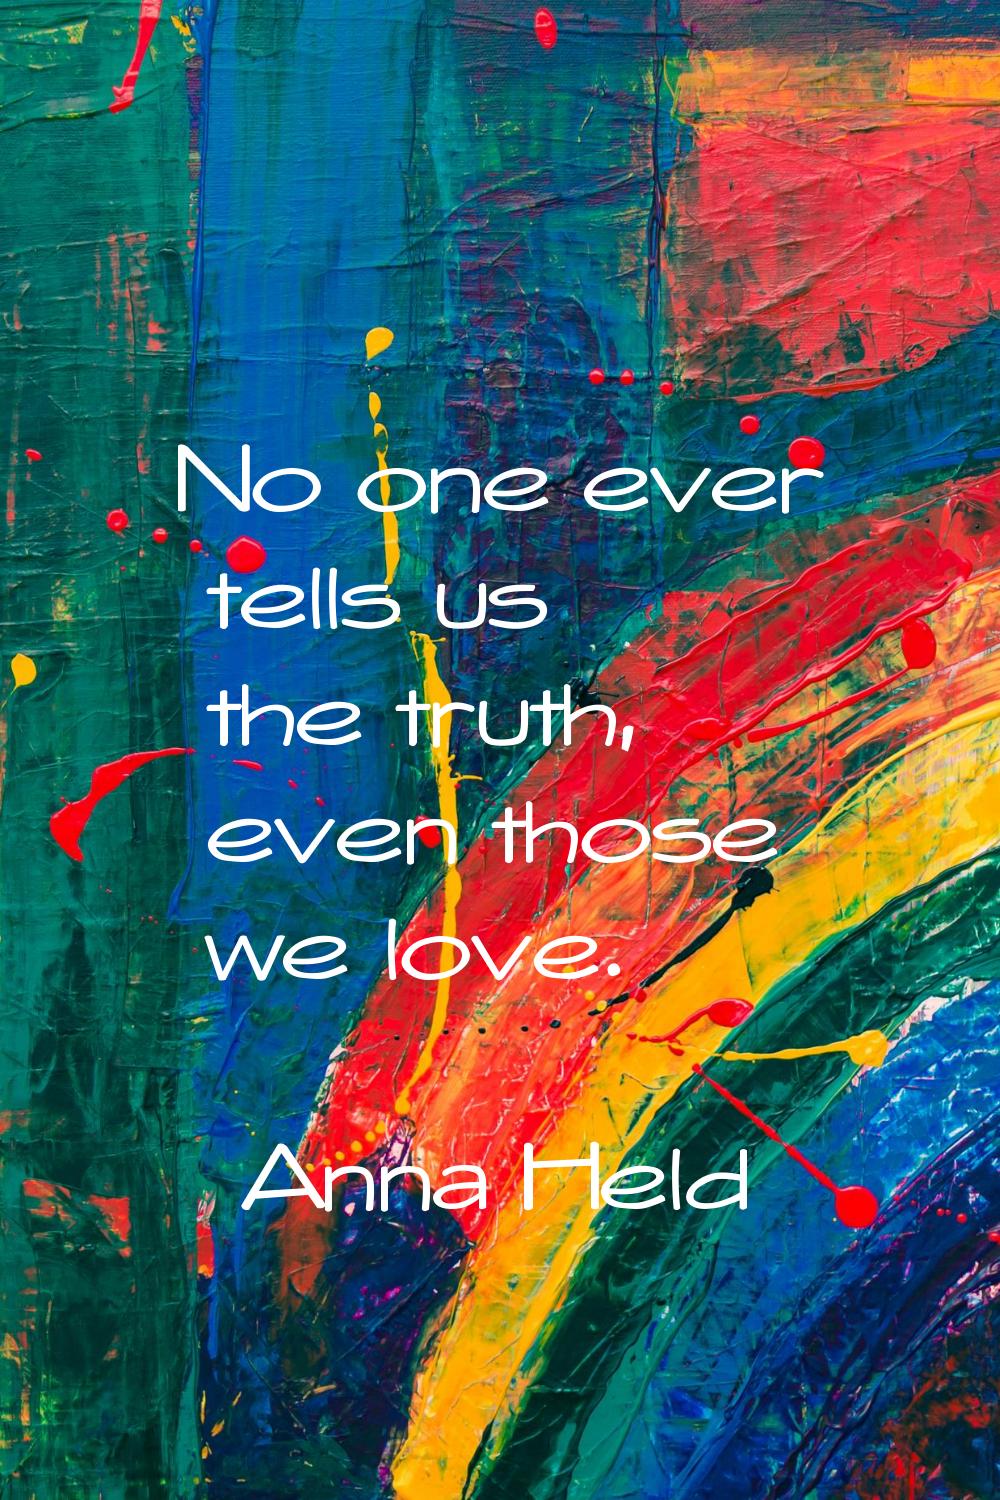 No one ever tells us the truth, even those we love.